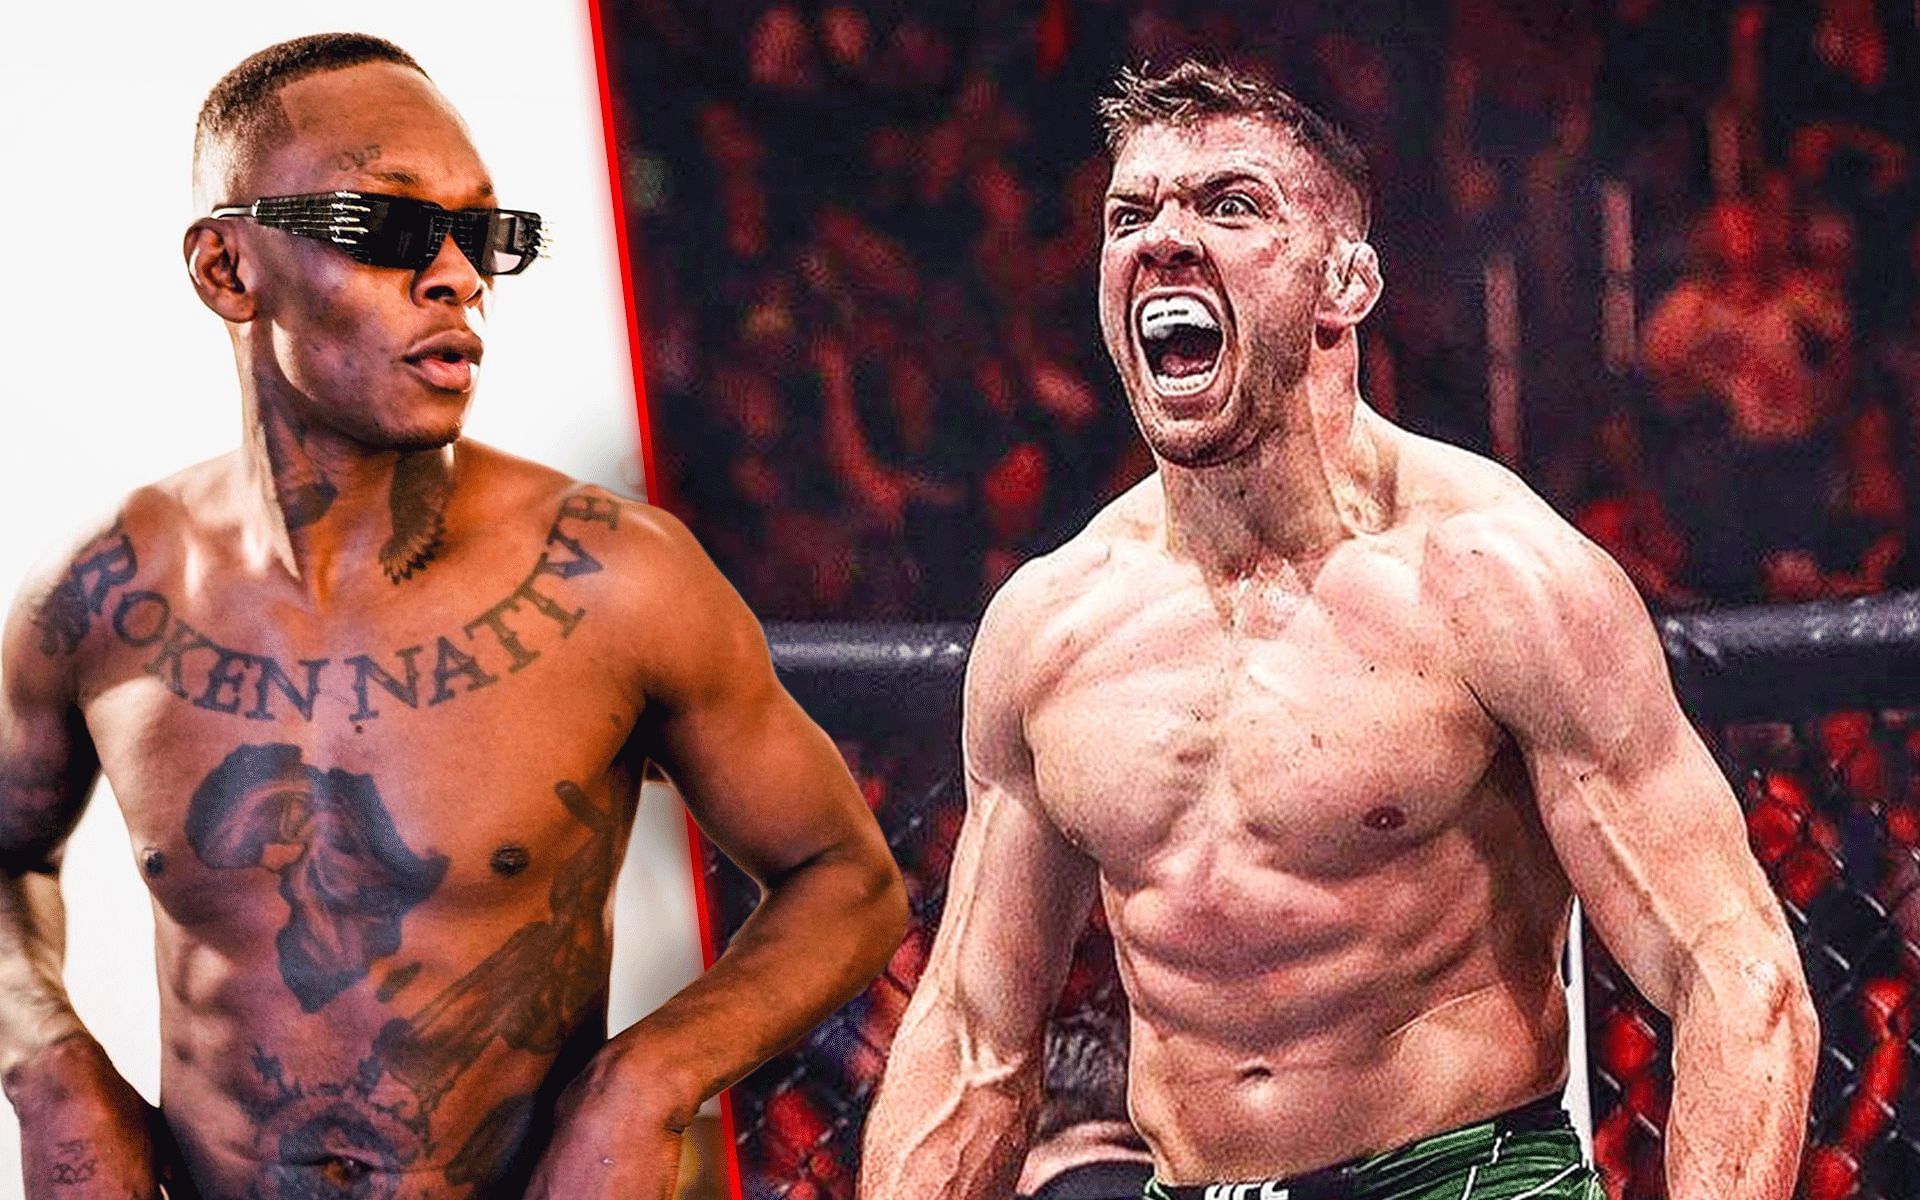 Israel Adesanya (left) and Dricus du Plessis (right) have long been at odds [Images courtesy: @stylebender and @dricusduplessis on Instagram]